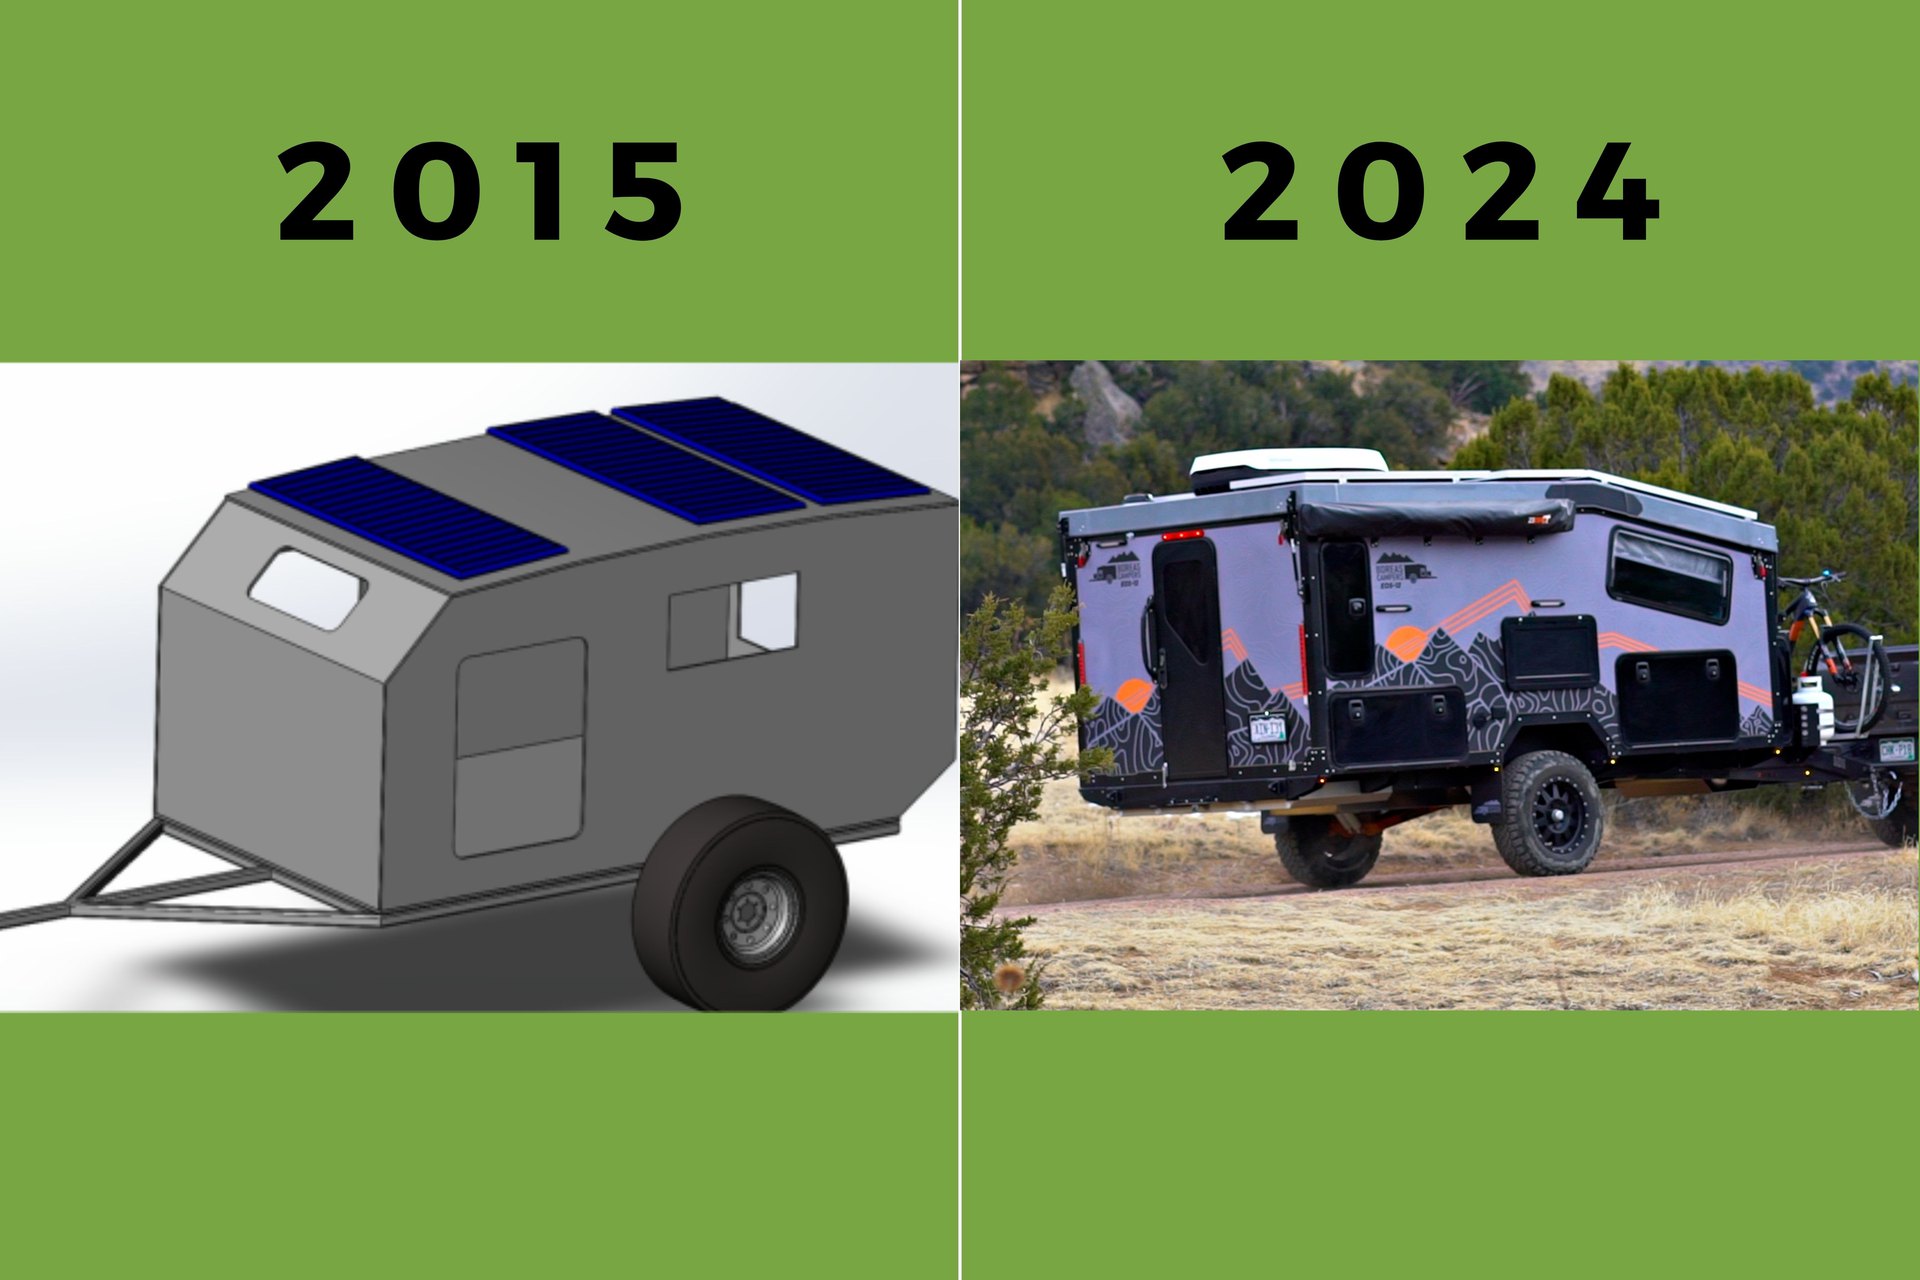 History of Boreas Campers